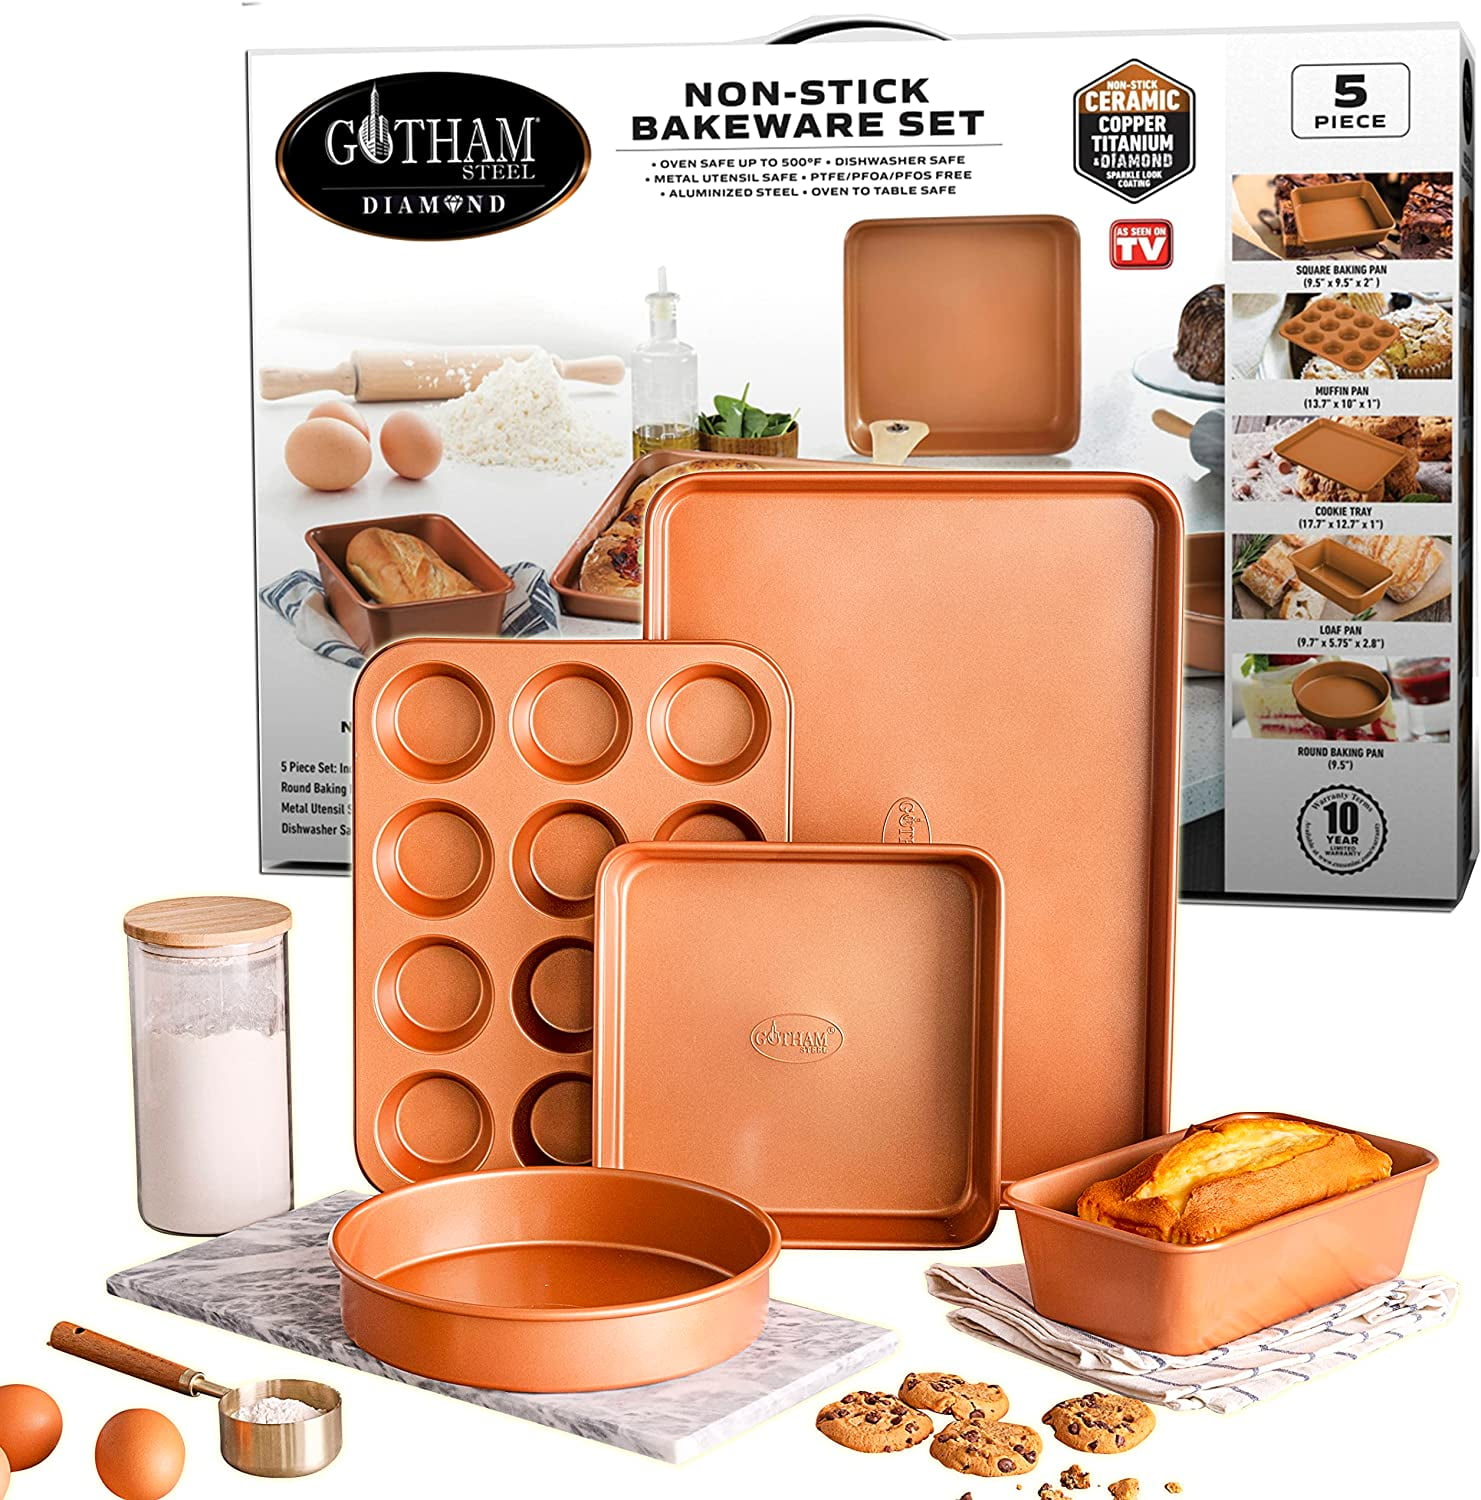 10 Piece Nonstick Cookware set with Titanium Copper and Ceramic Coating -  On Sale - Bed Bath & Beyond - 37503827